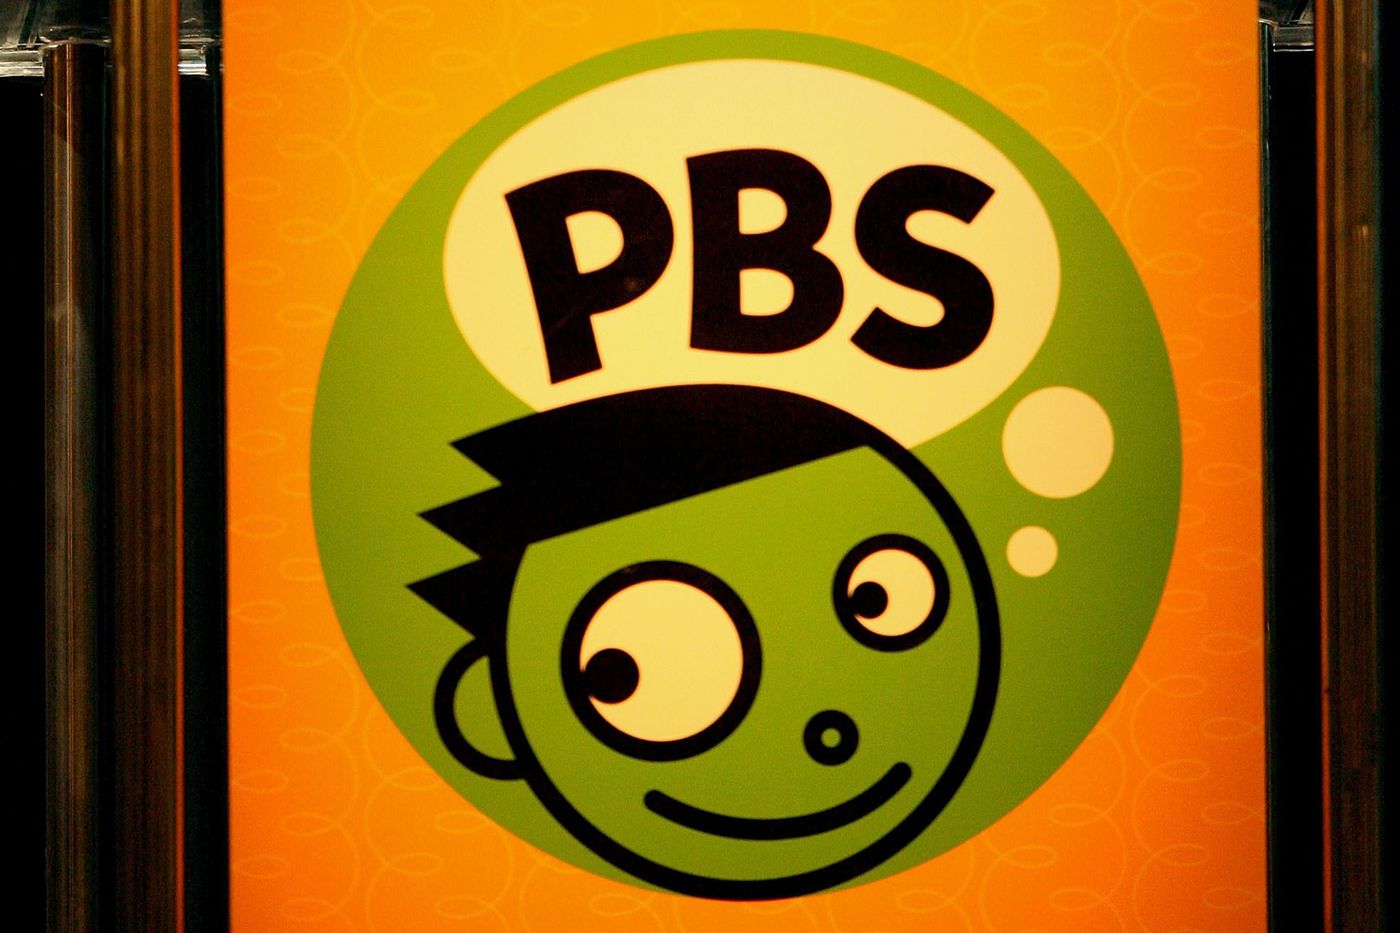 Remembering some early 2000s PBS Kids cartoons - Mid-Major Madness